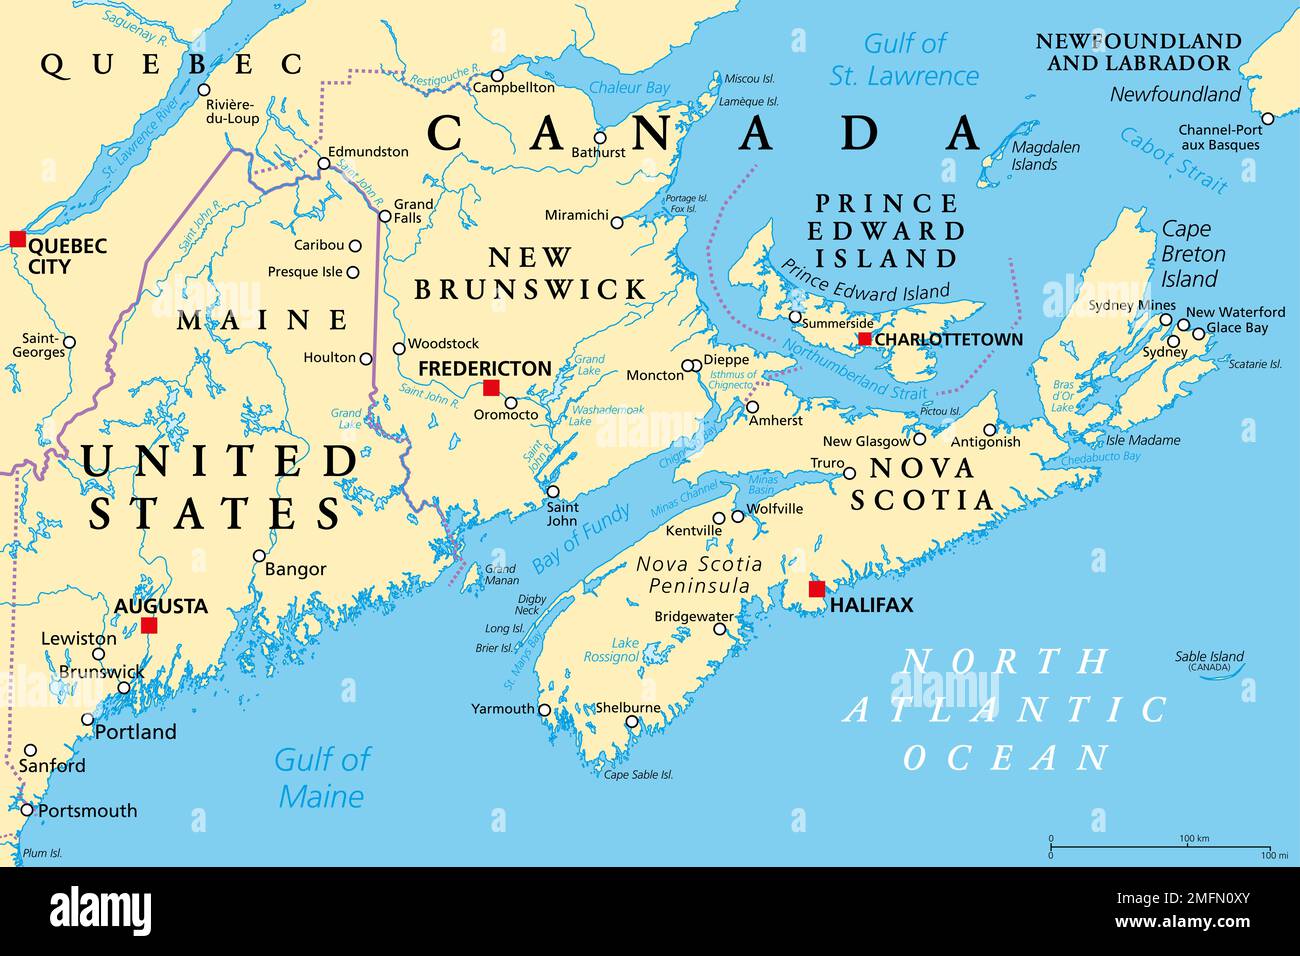 The Maritimes, also called Maritime provinces, a region of Eastern Canada, political map, with capitals, borders and largest cities. Stock Photo